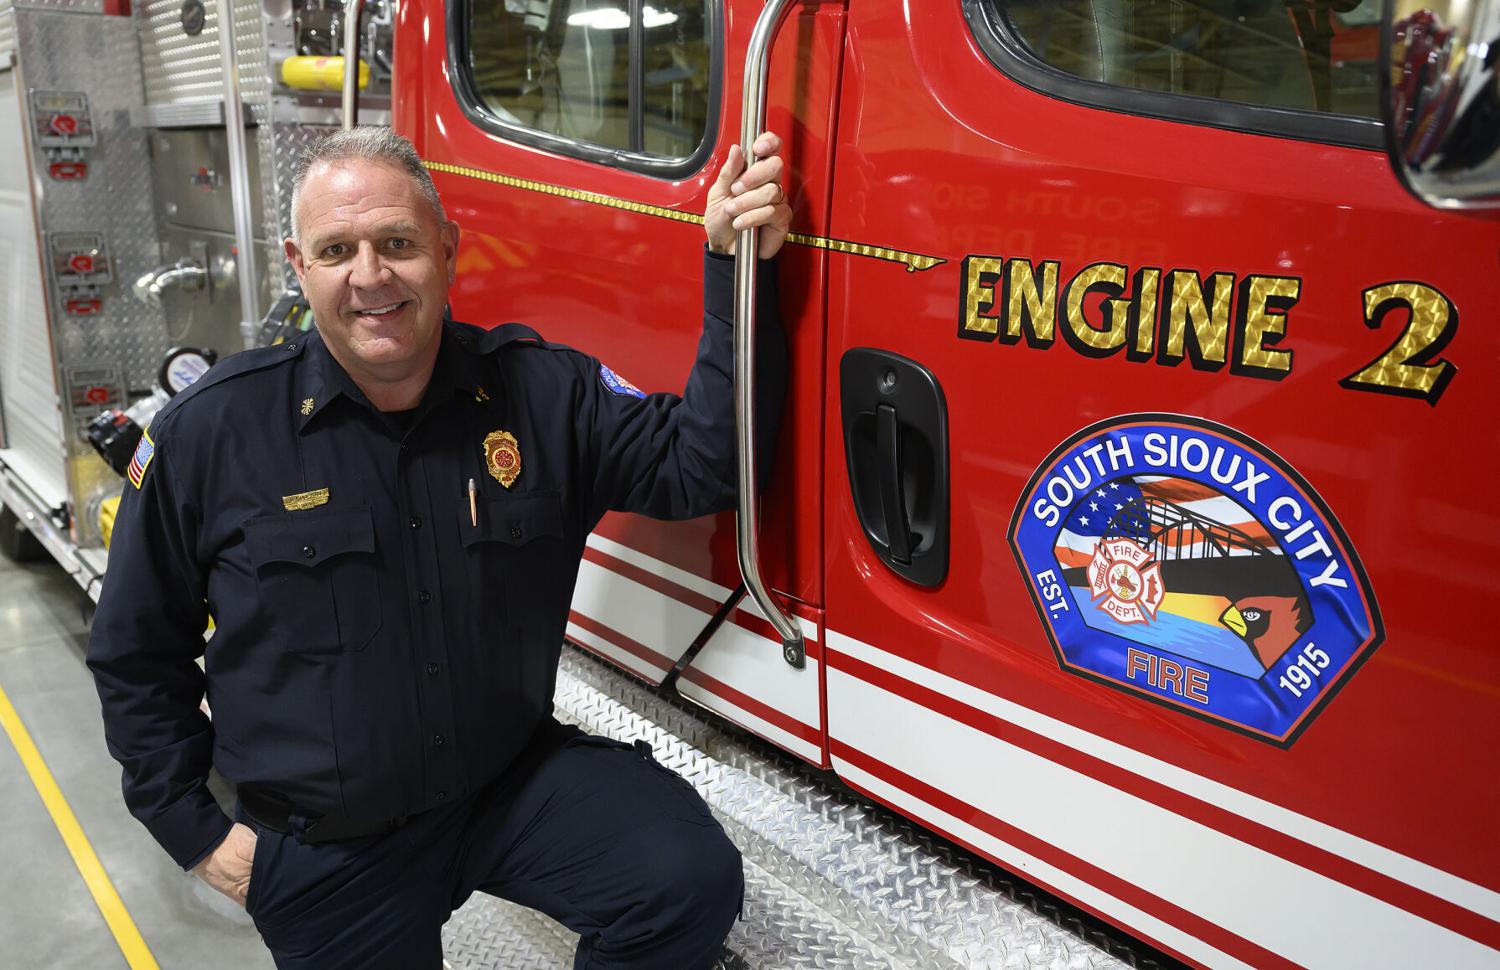 South Sioux aims to add firefighters through sales tax vote [Video]